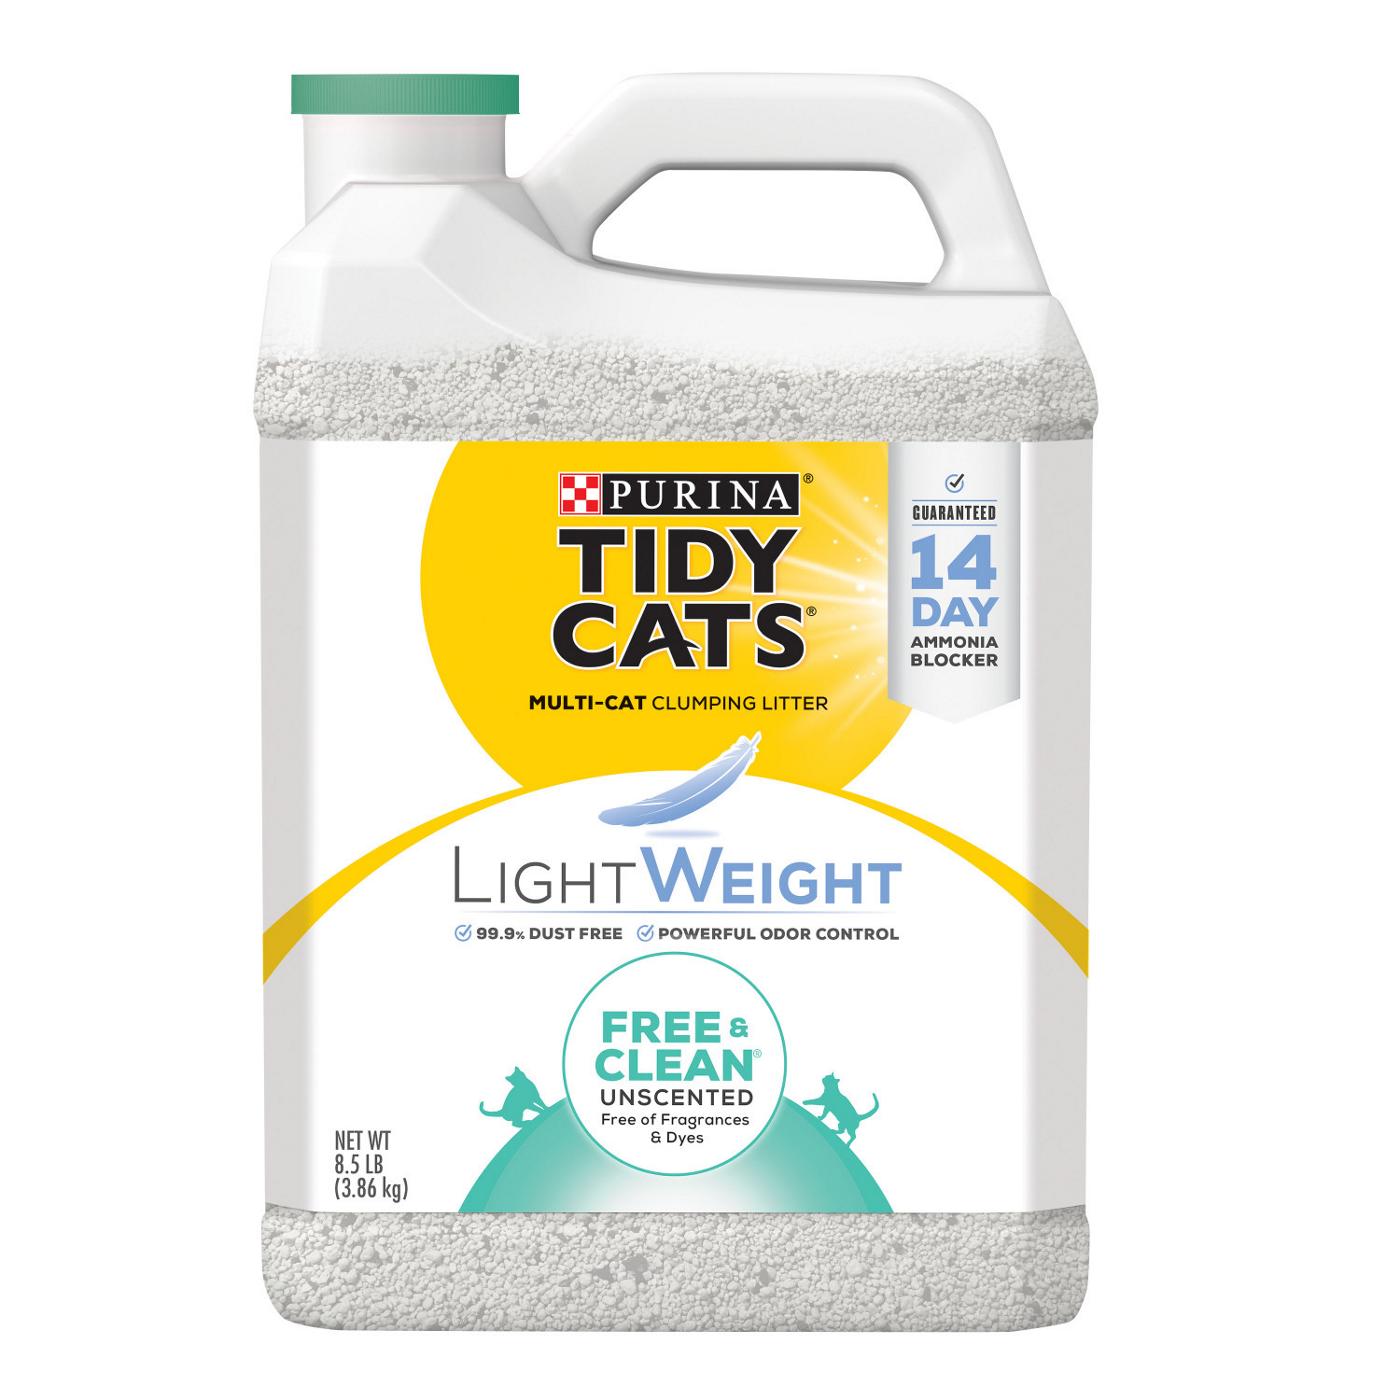 Tidy Cats Purina Tidy Cats Low Dust, Clumping Cat Litter, LightWeight Free & Clean Unscented, Multi Cat Litter; image 1 of 2